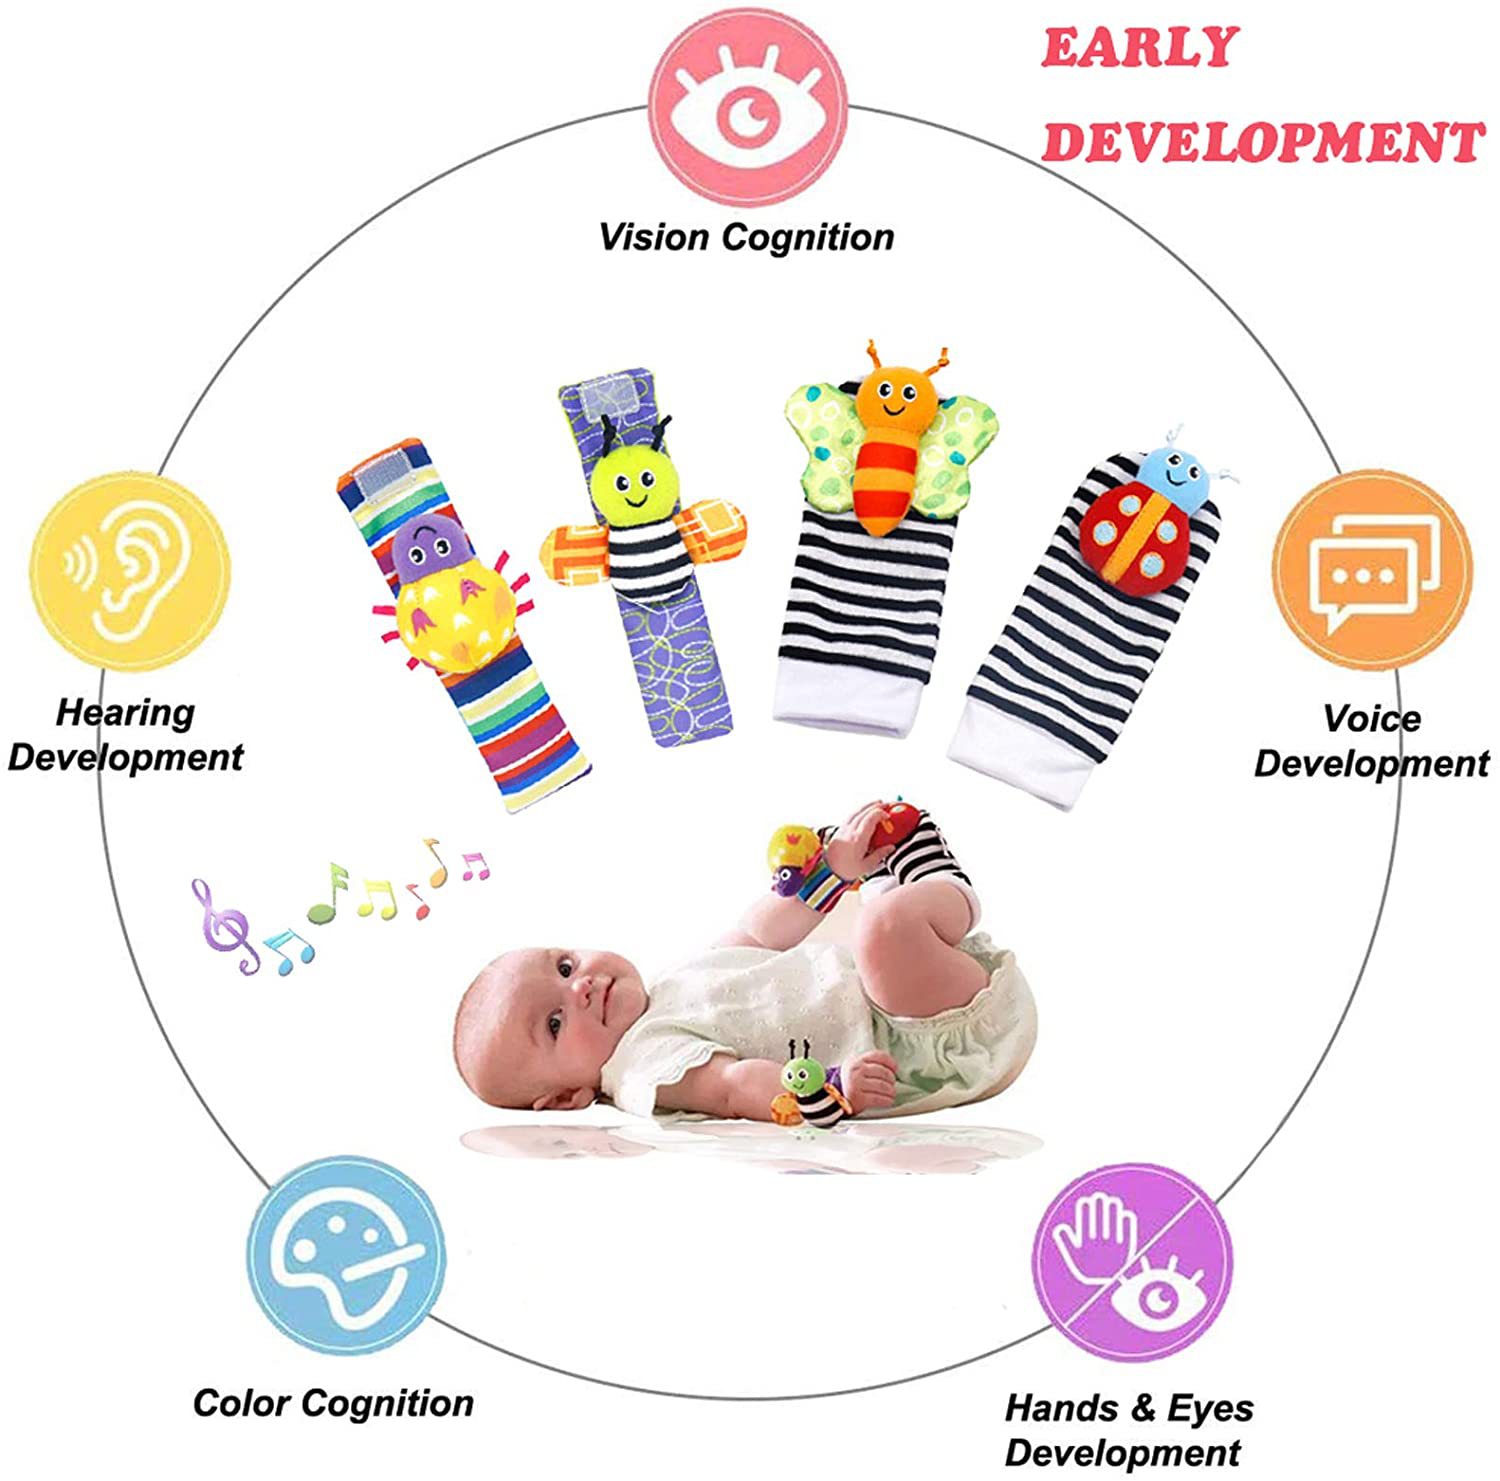 Baby foot detectors and wrist rattles, baby developmental texture toys and baby toys, socks and baby wrist rattles, newborn toys for boys and girls